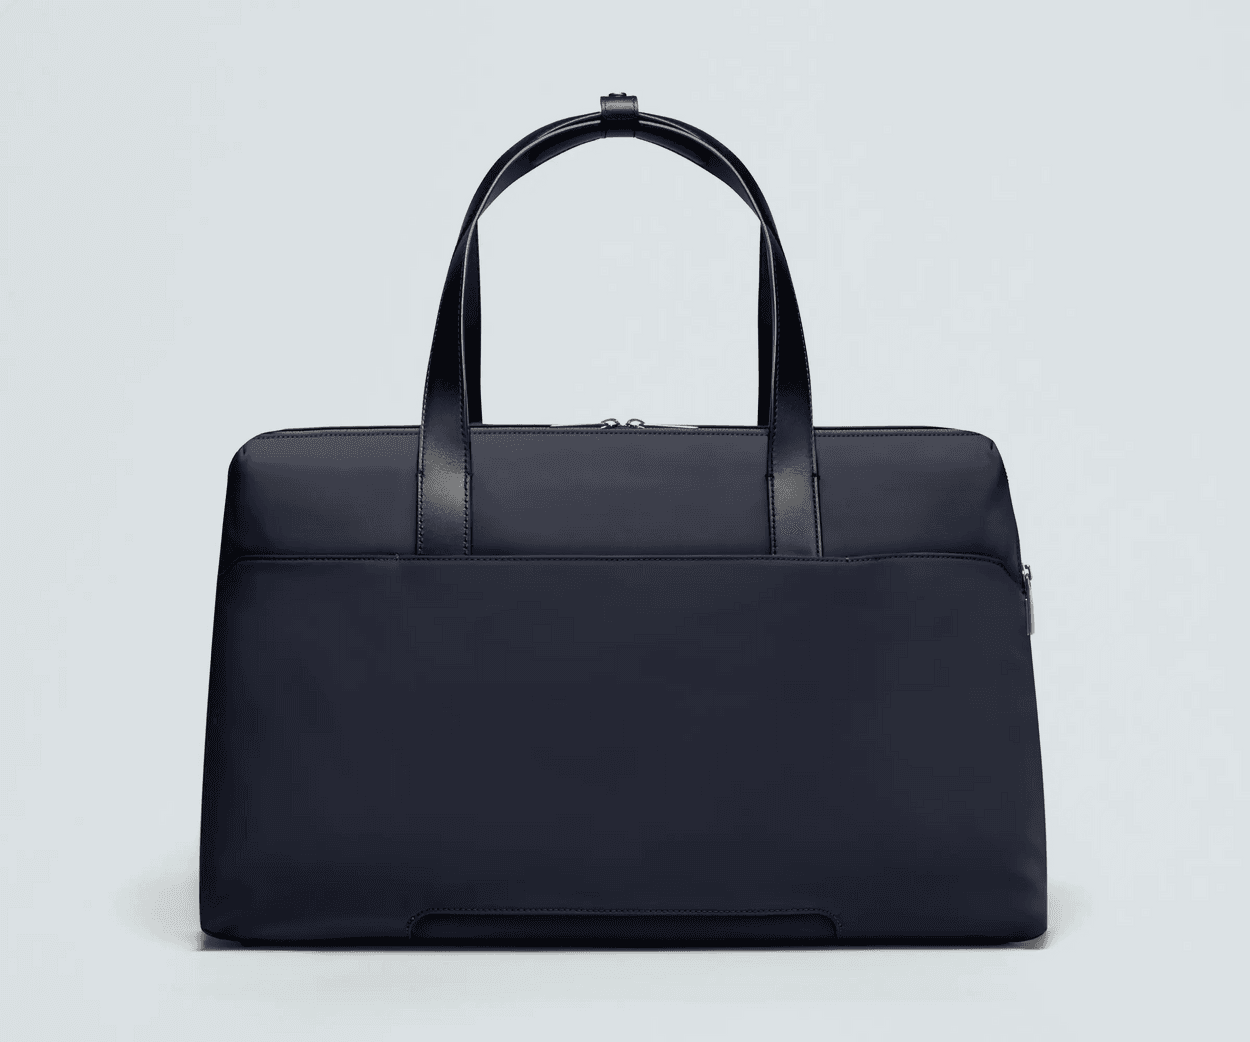 https://time.com/shopping/static/bba5a0c3f018586413bce87873a10256/860fe/awa-ys-the-large-everywhere-bag.png